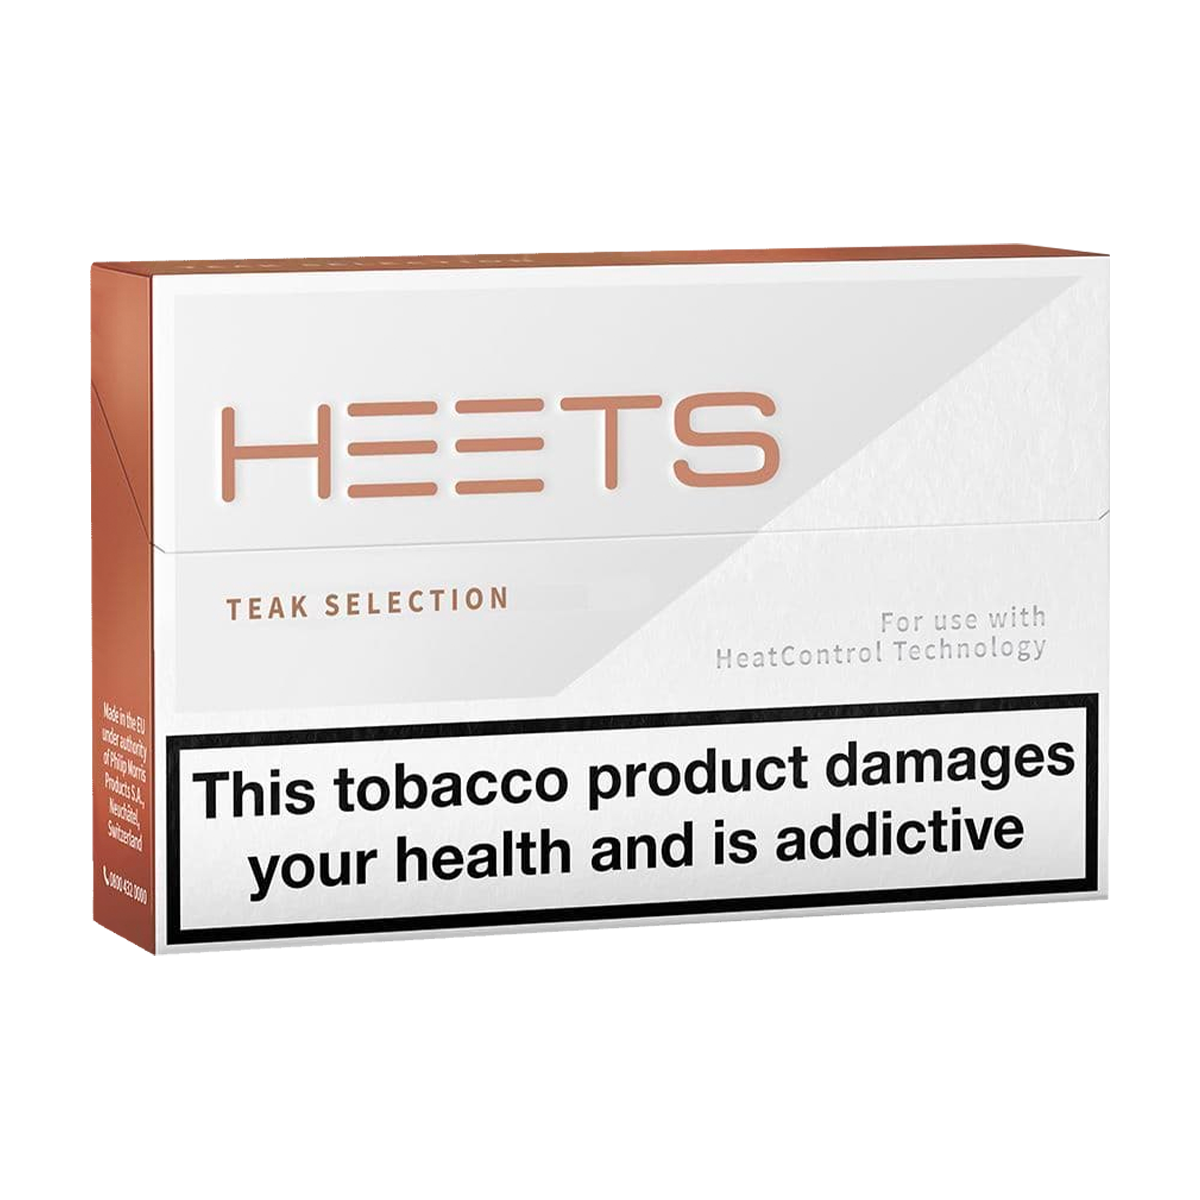 Teak HEETS by IQOS ANY 10 Packs For £50 Vape Shop